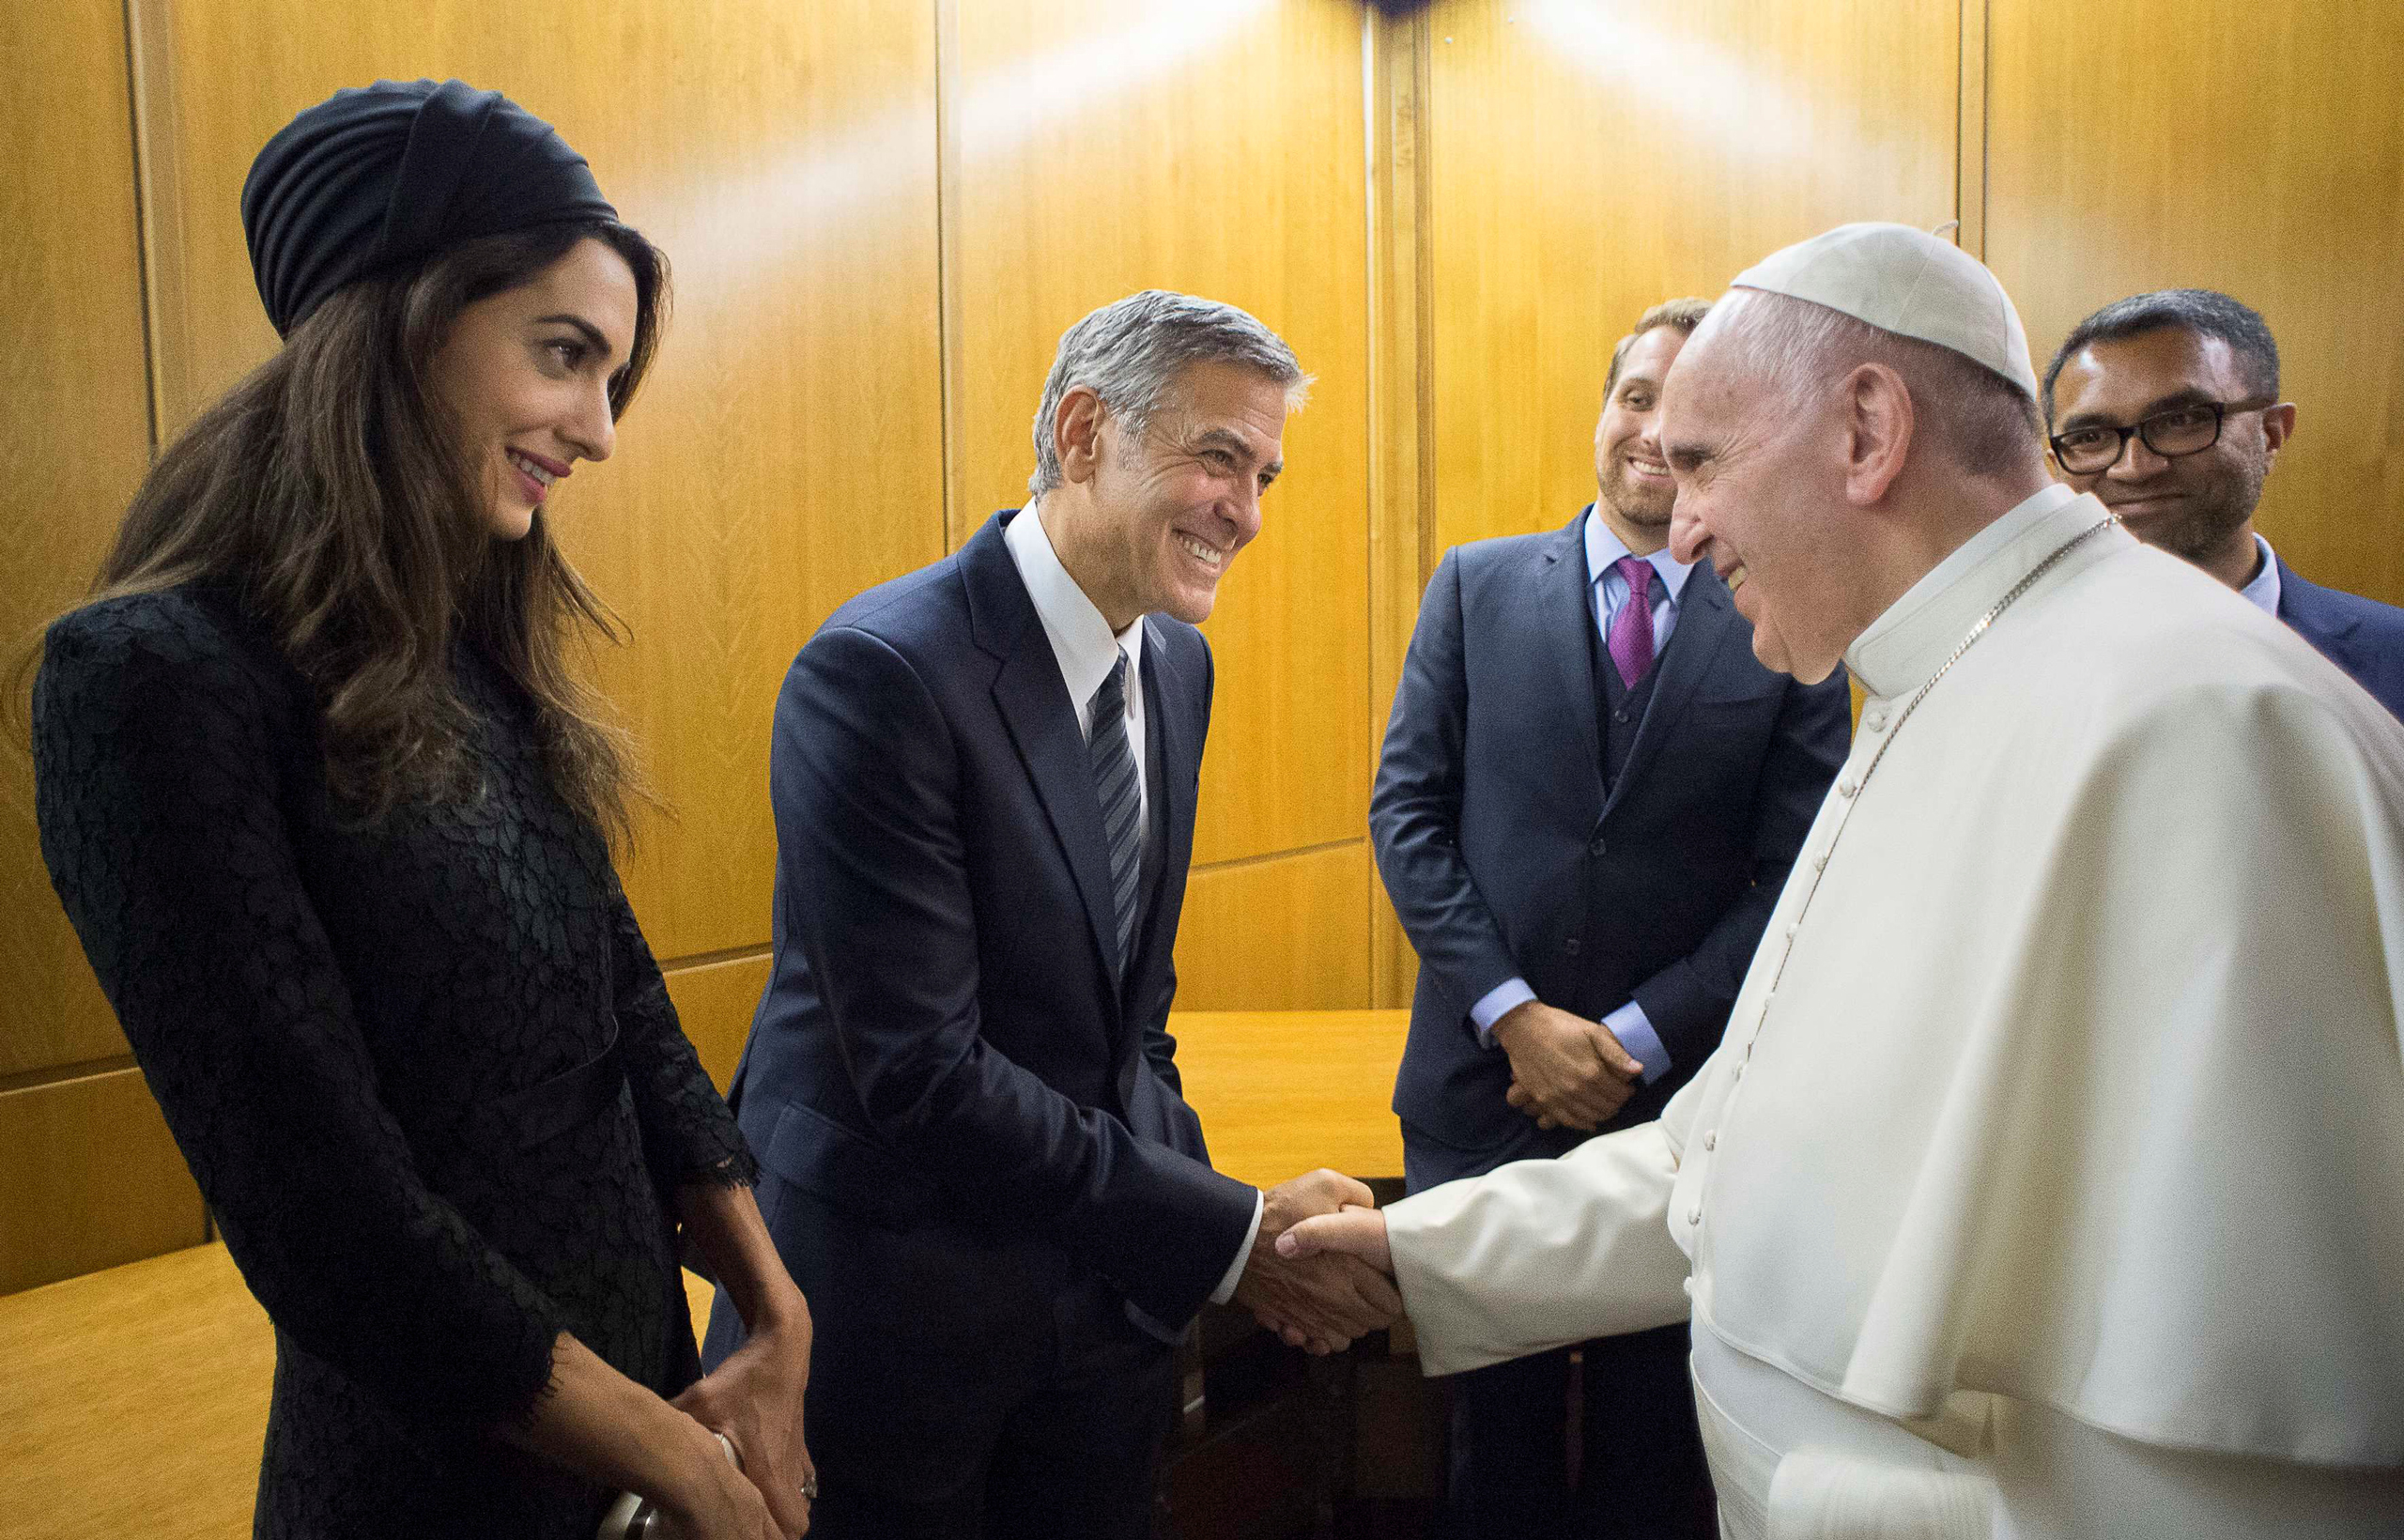 Pope Francis meets George and Amal Clooney during a meeting of the Scholas Occurrentes at the Vatican on May 29, 2016. (Osservatore Romano/Reuters)